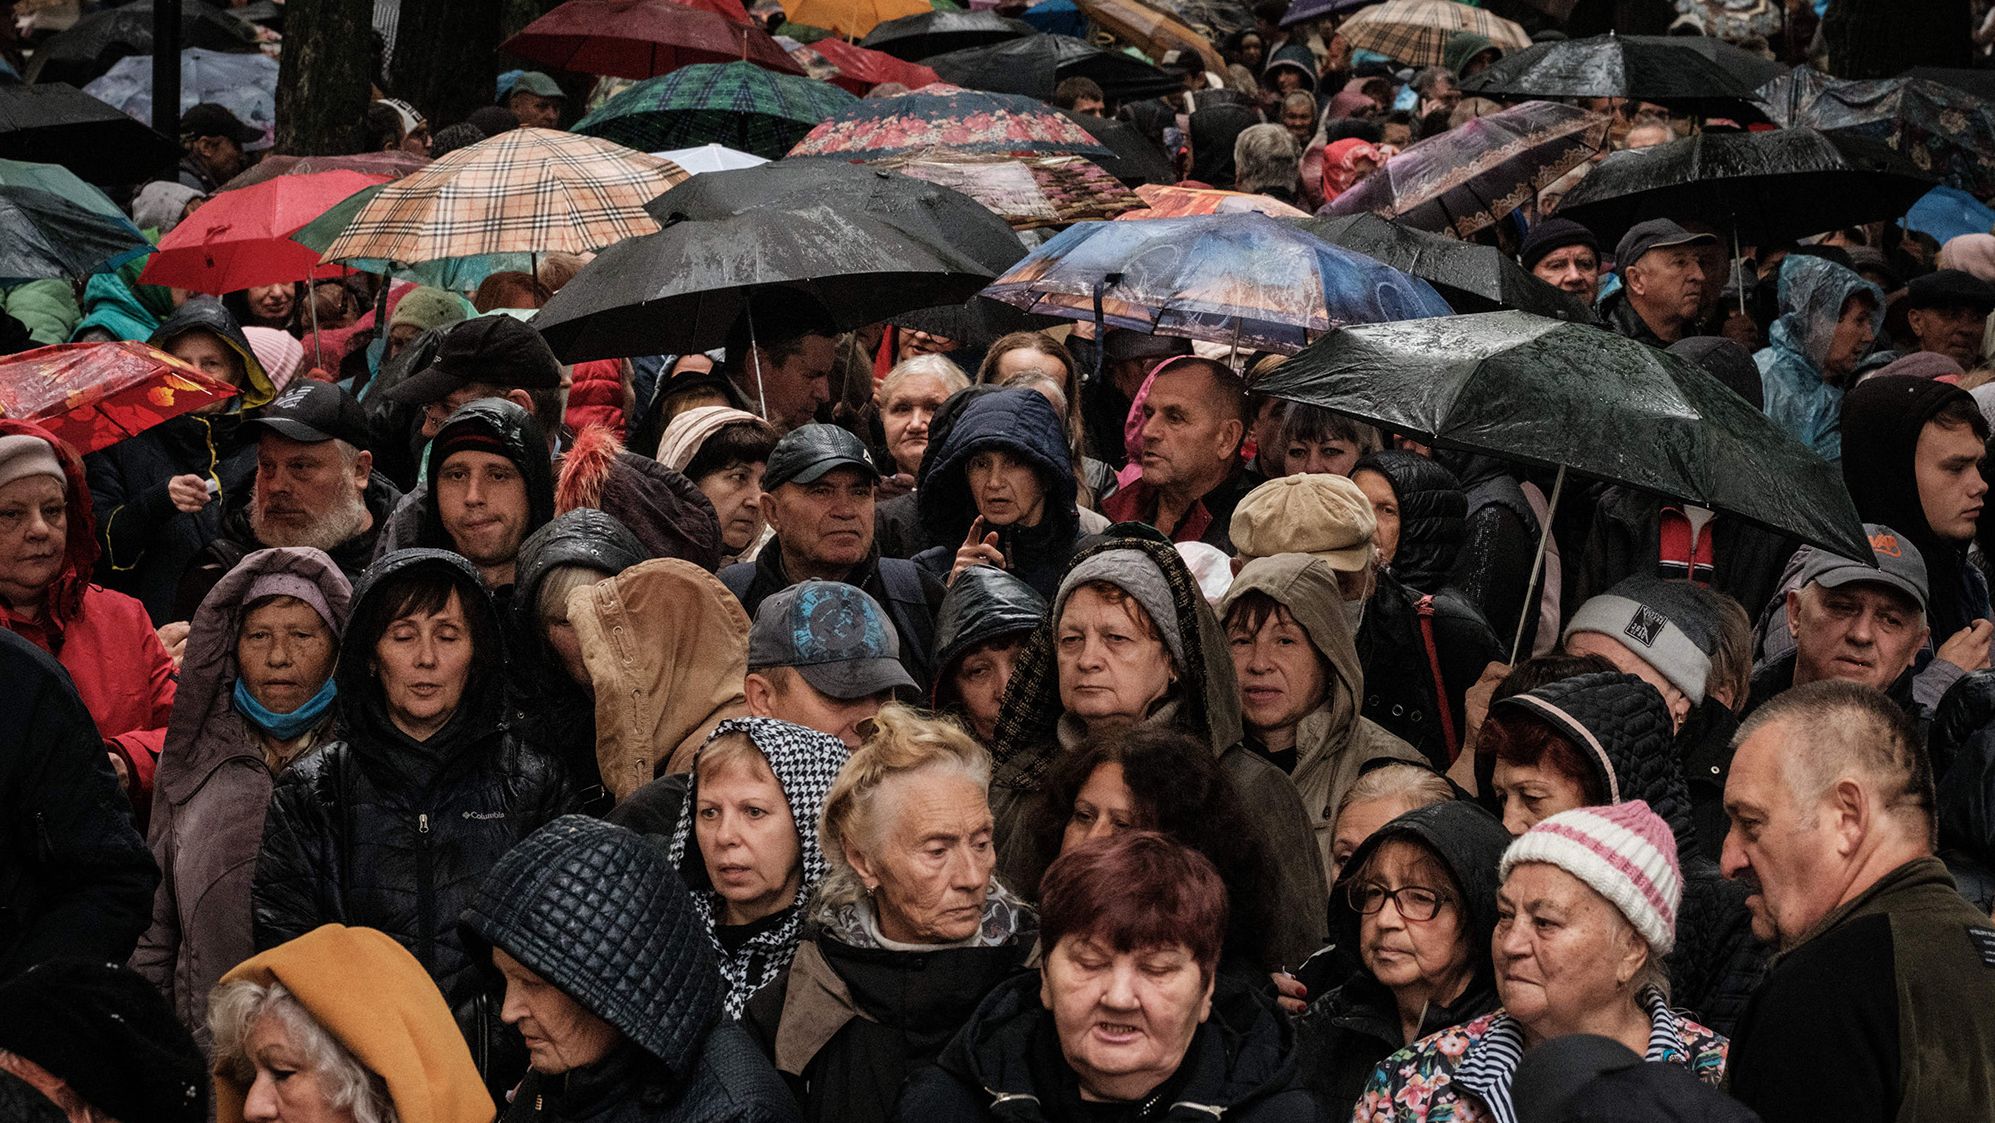 People wait for food aid distributed by the local branch of Caritas Internationalis, a Catholic charity organisation, in Kharkiv, Ukraine, on September 27.